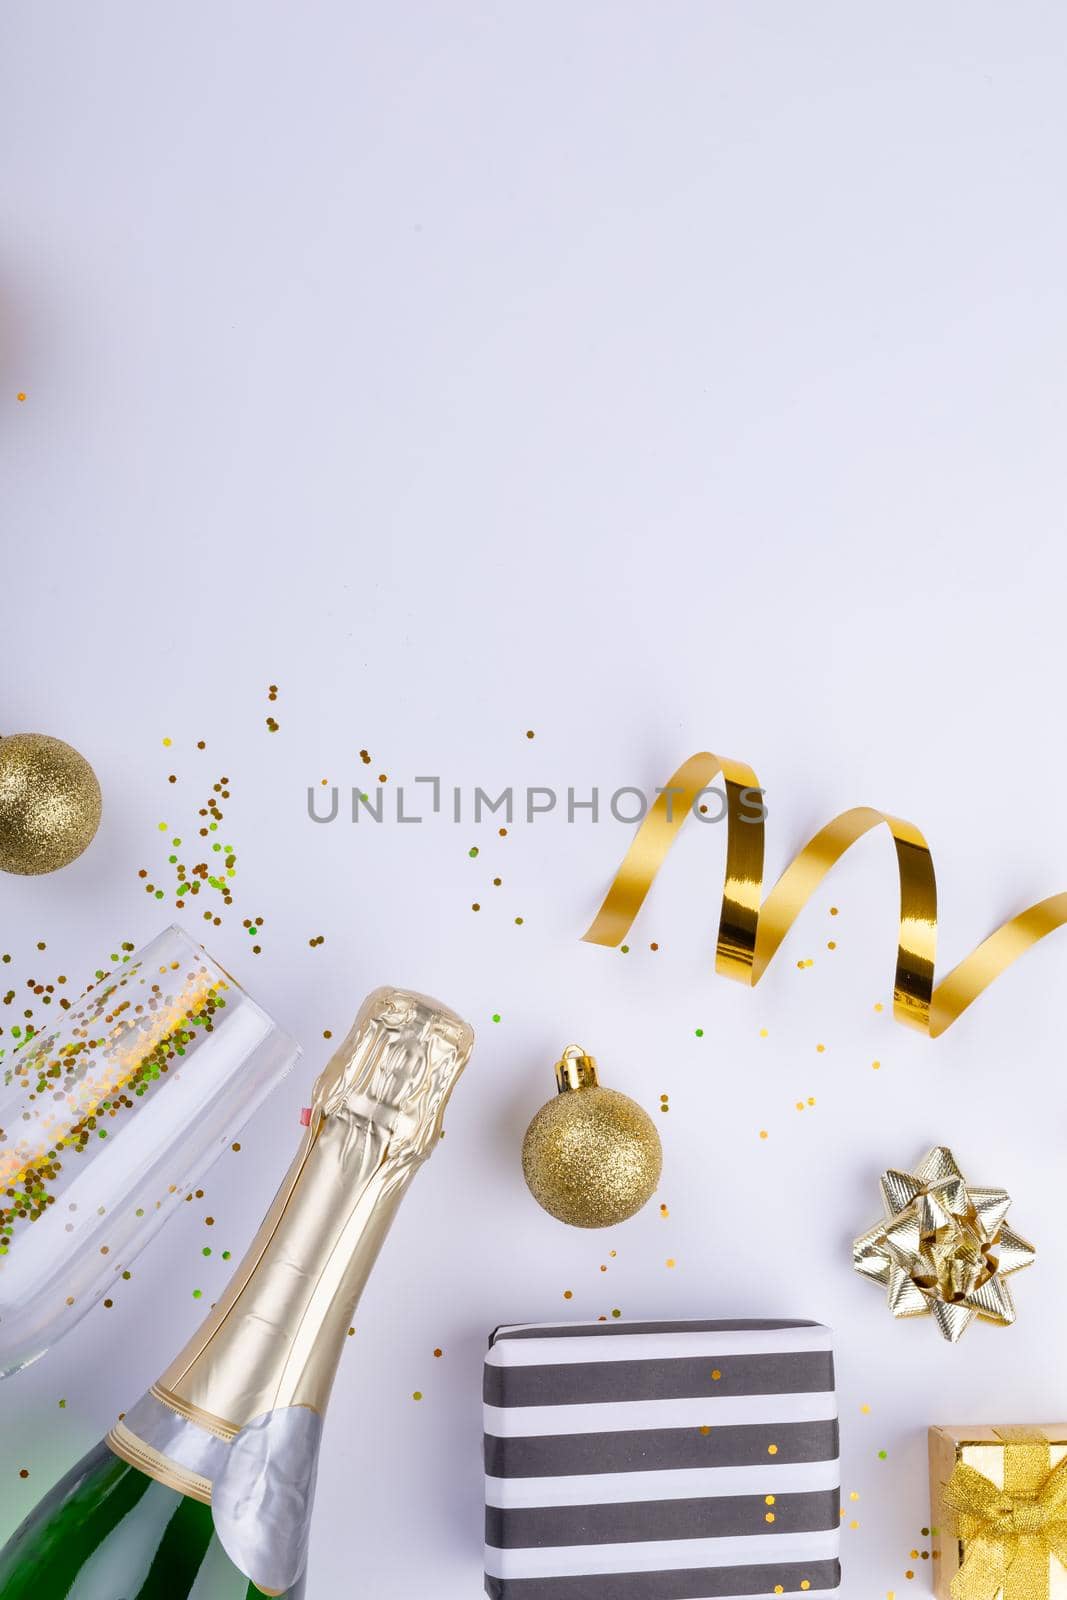 Overhead shot of christmas gifts and decoration by champagne on white background, copy space. celebration, party and christmas concept.